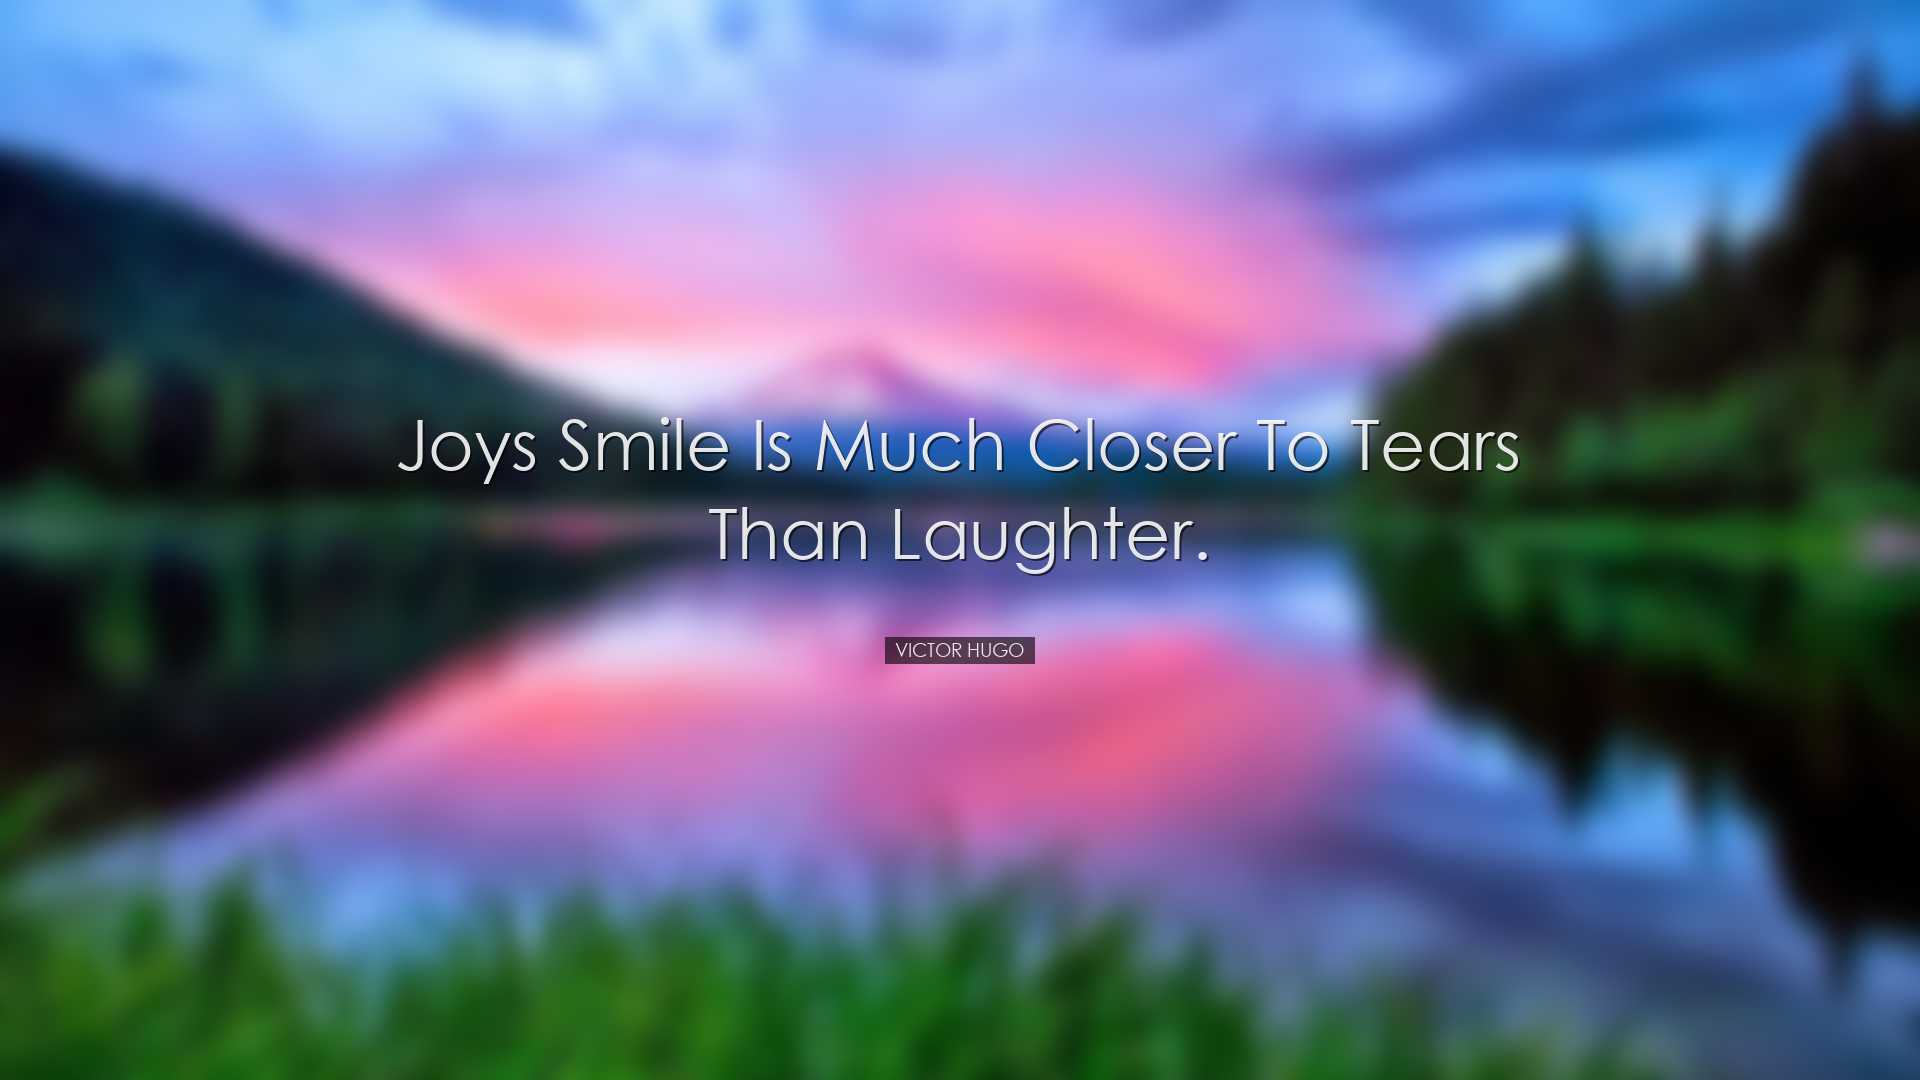 Joys smile is much closer to tears than laughter. - Victor Hugo